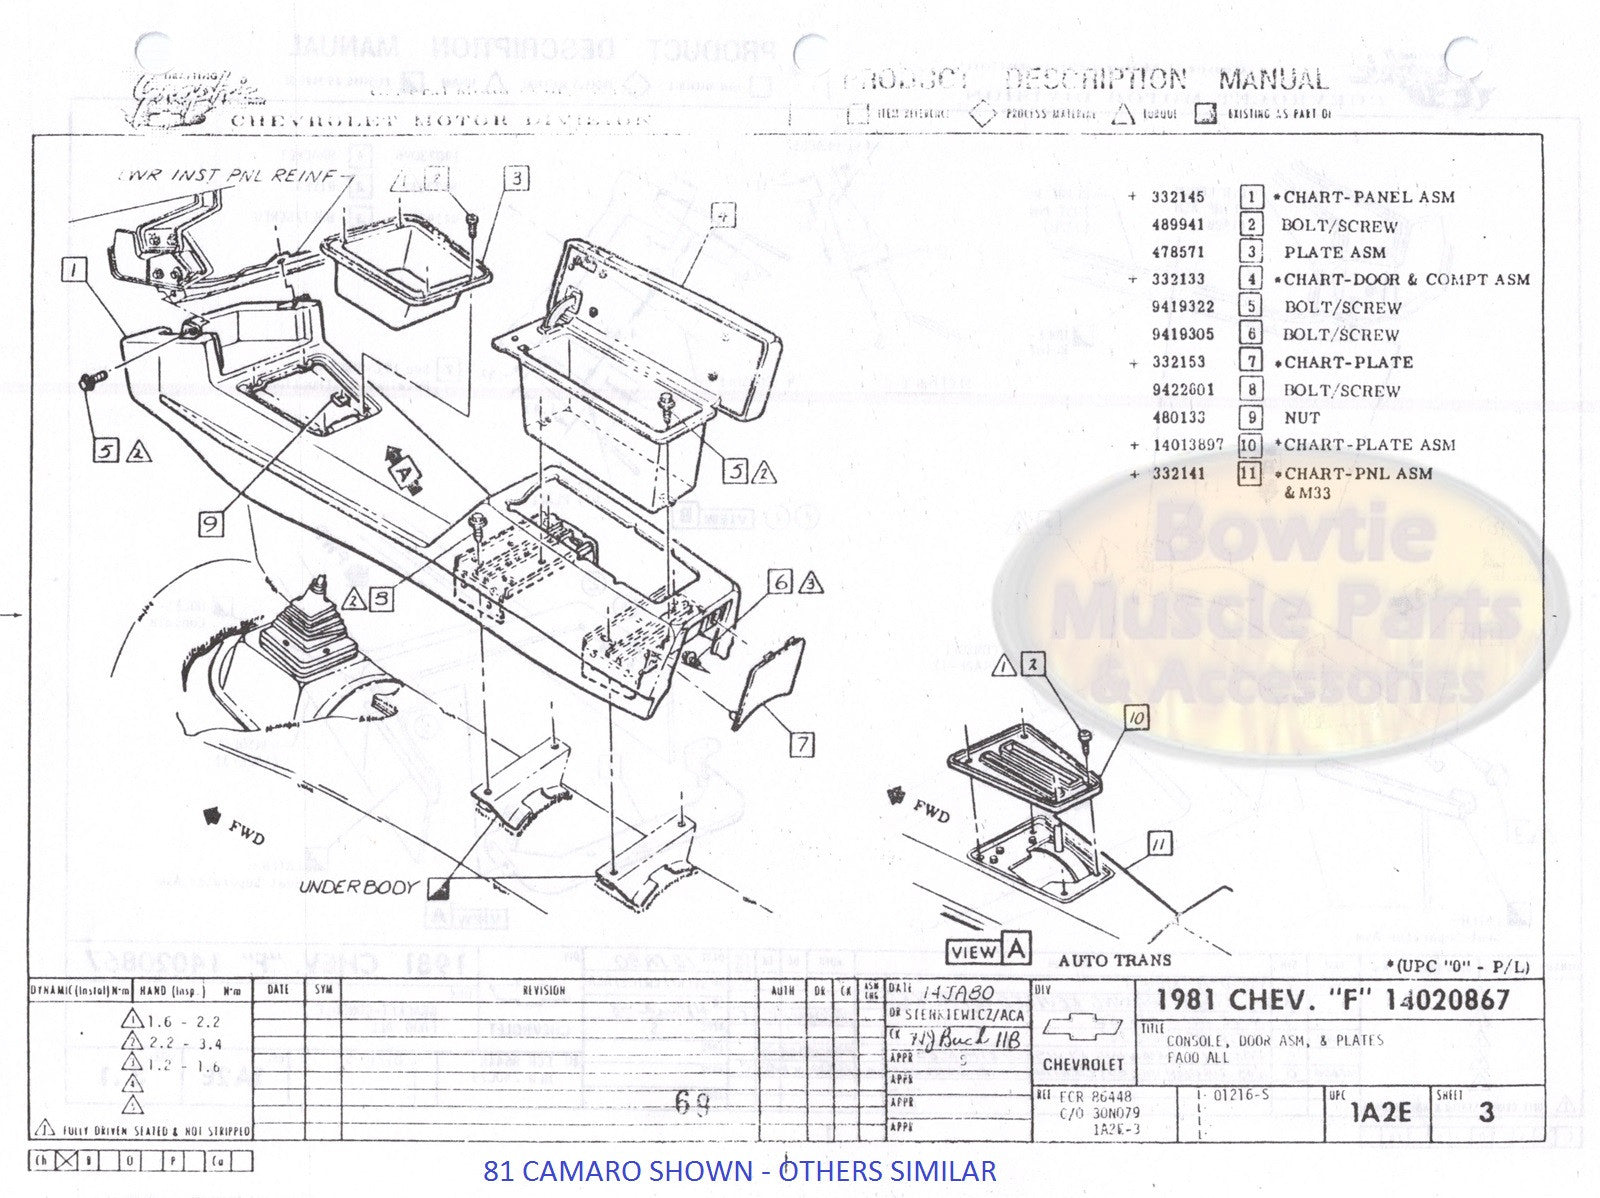 1972 72 Camaro Factory Assembly Manual Z28 SS RS ... 1969 nova ss wiring diagram further camaro console 